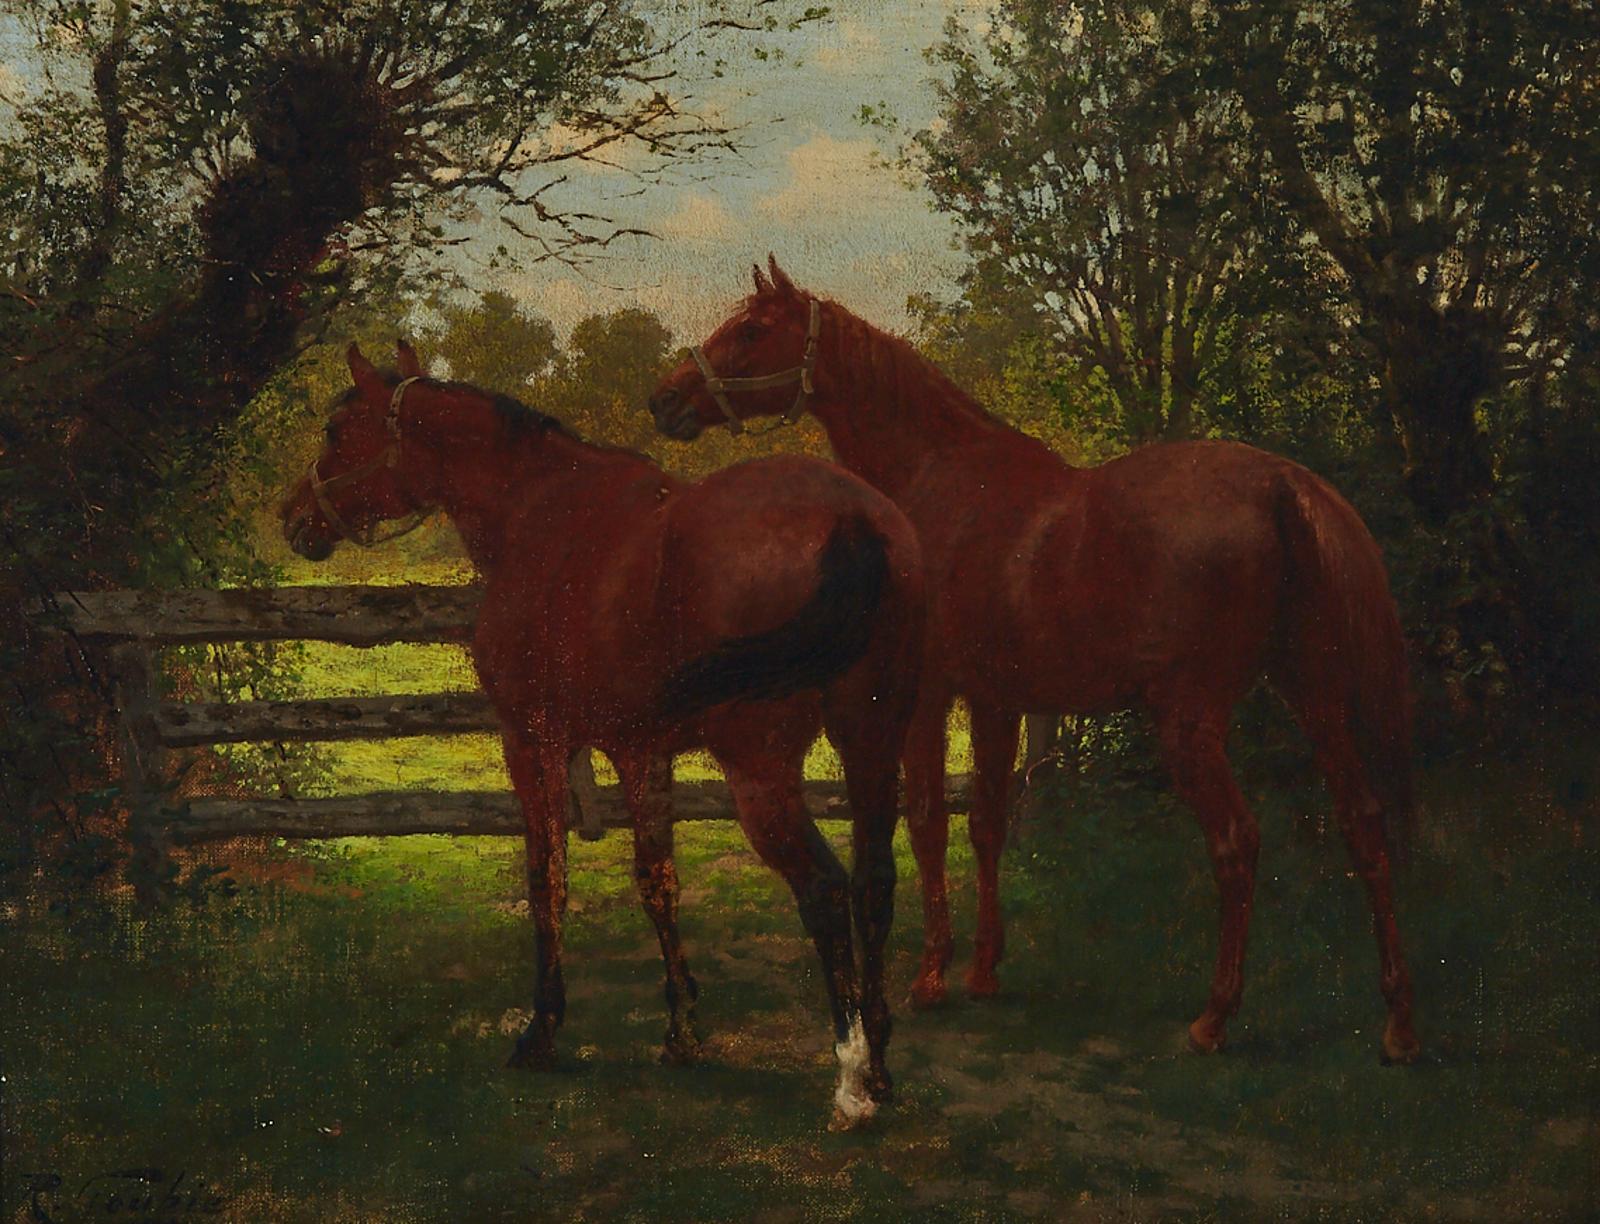 Jean Richard Goubie (1842-1899) - Two Horses In Pasture